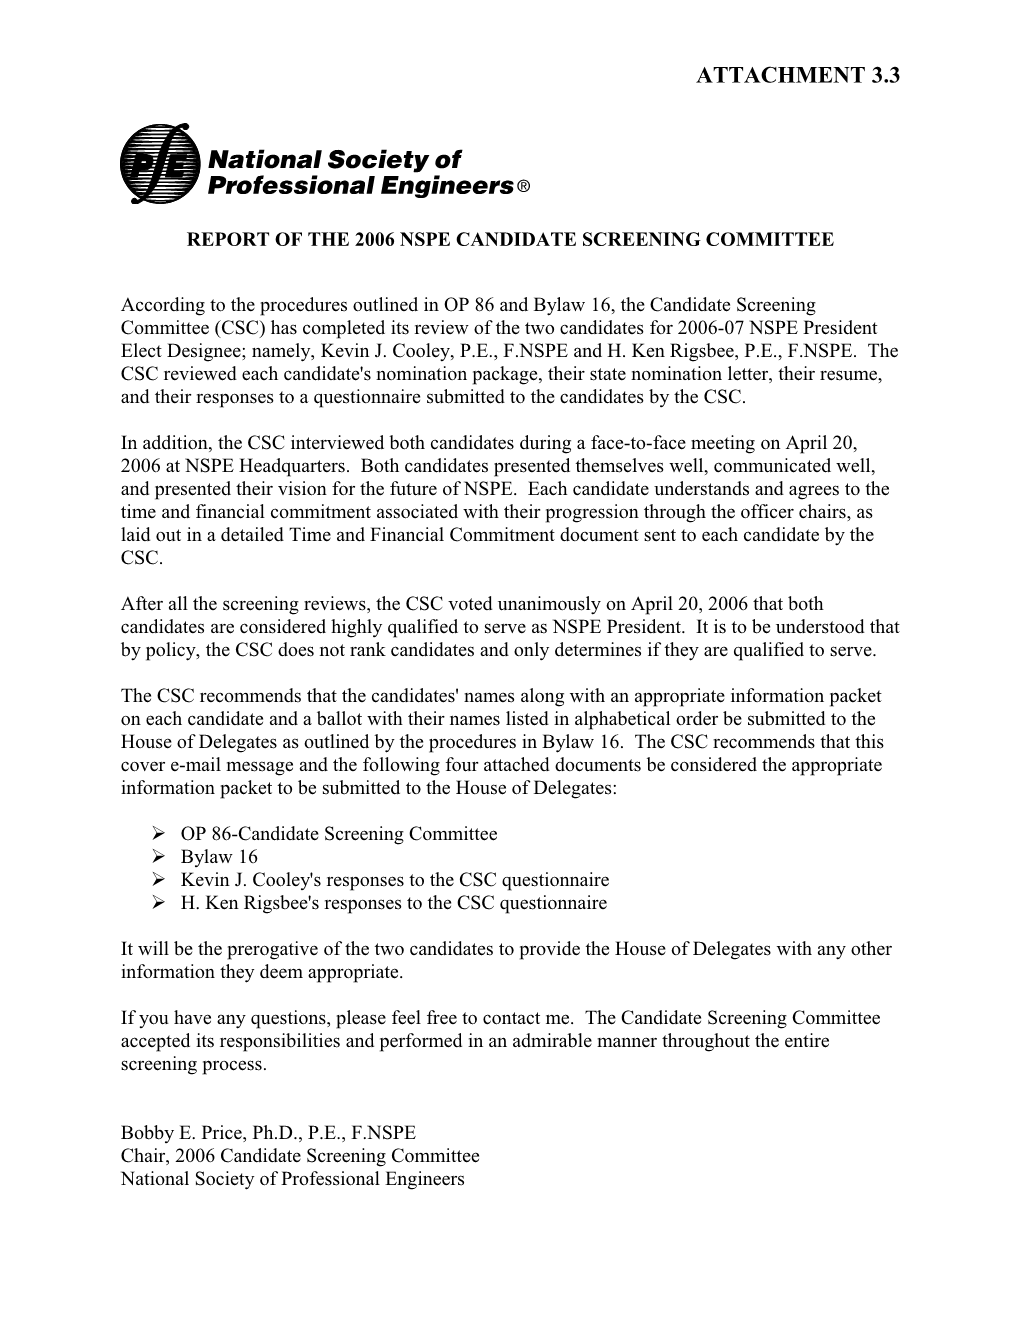 Report of the 2006 Nspe Candidate Screening Committee